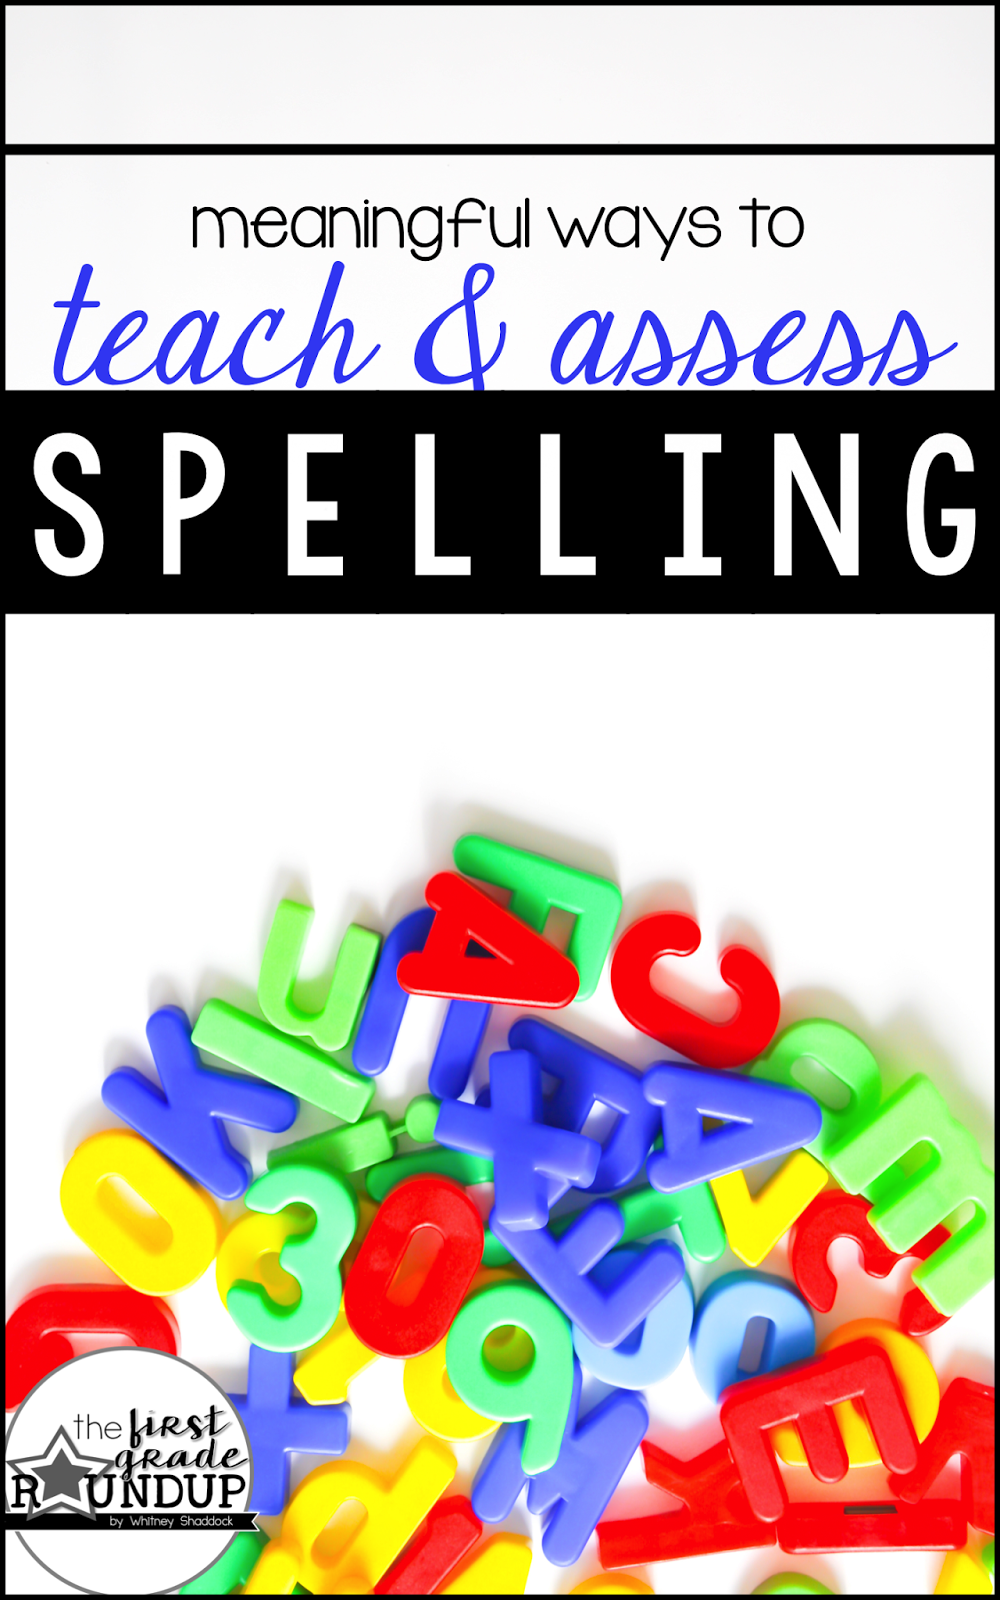 Spelling Tests for First Graders - Firstgraderoundup